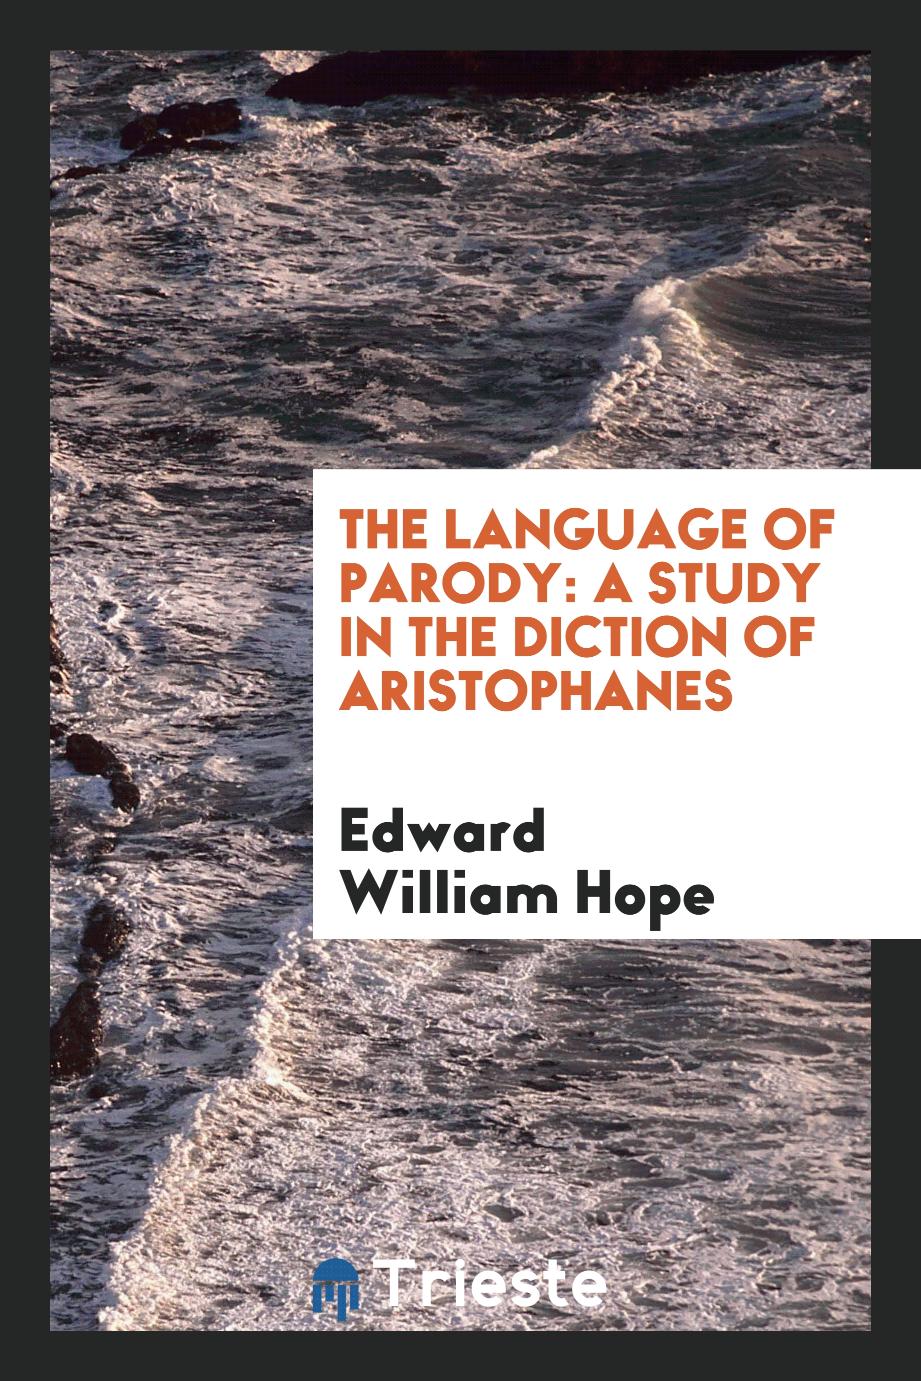 The Language of Parody: A Study in the Diction of Aristophanes